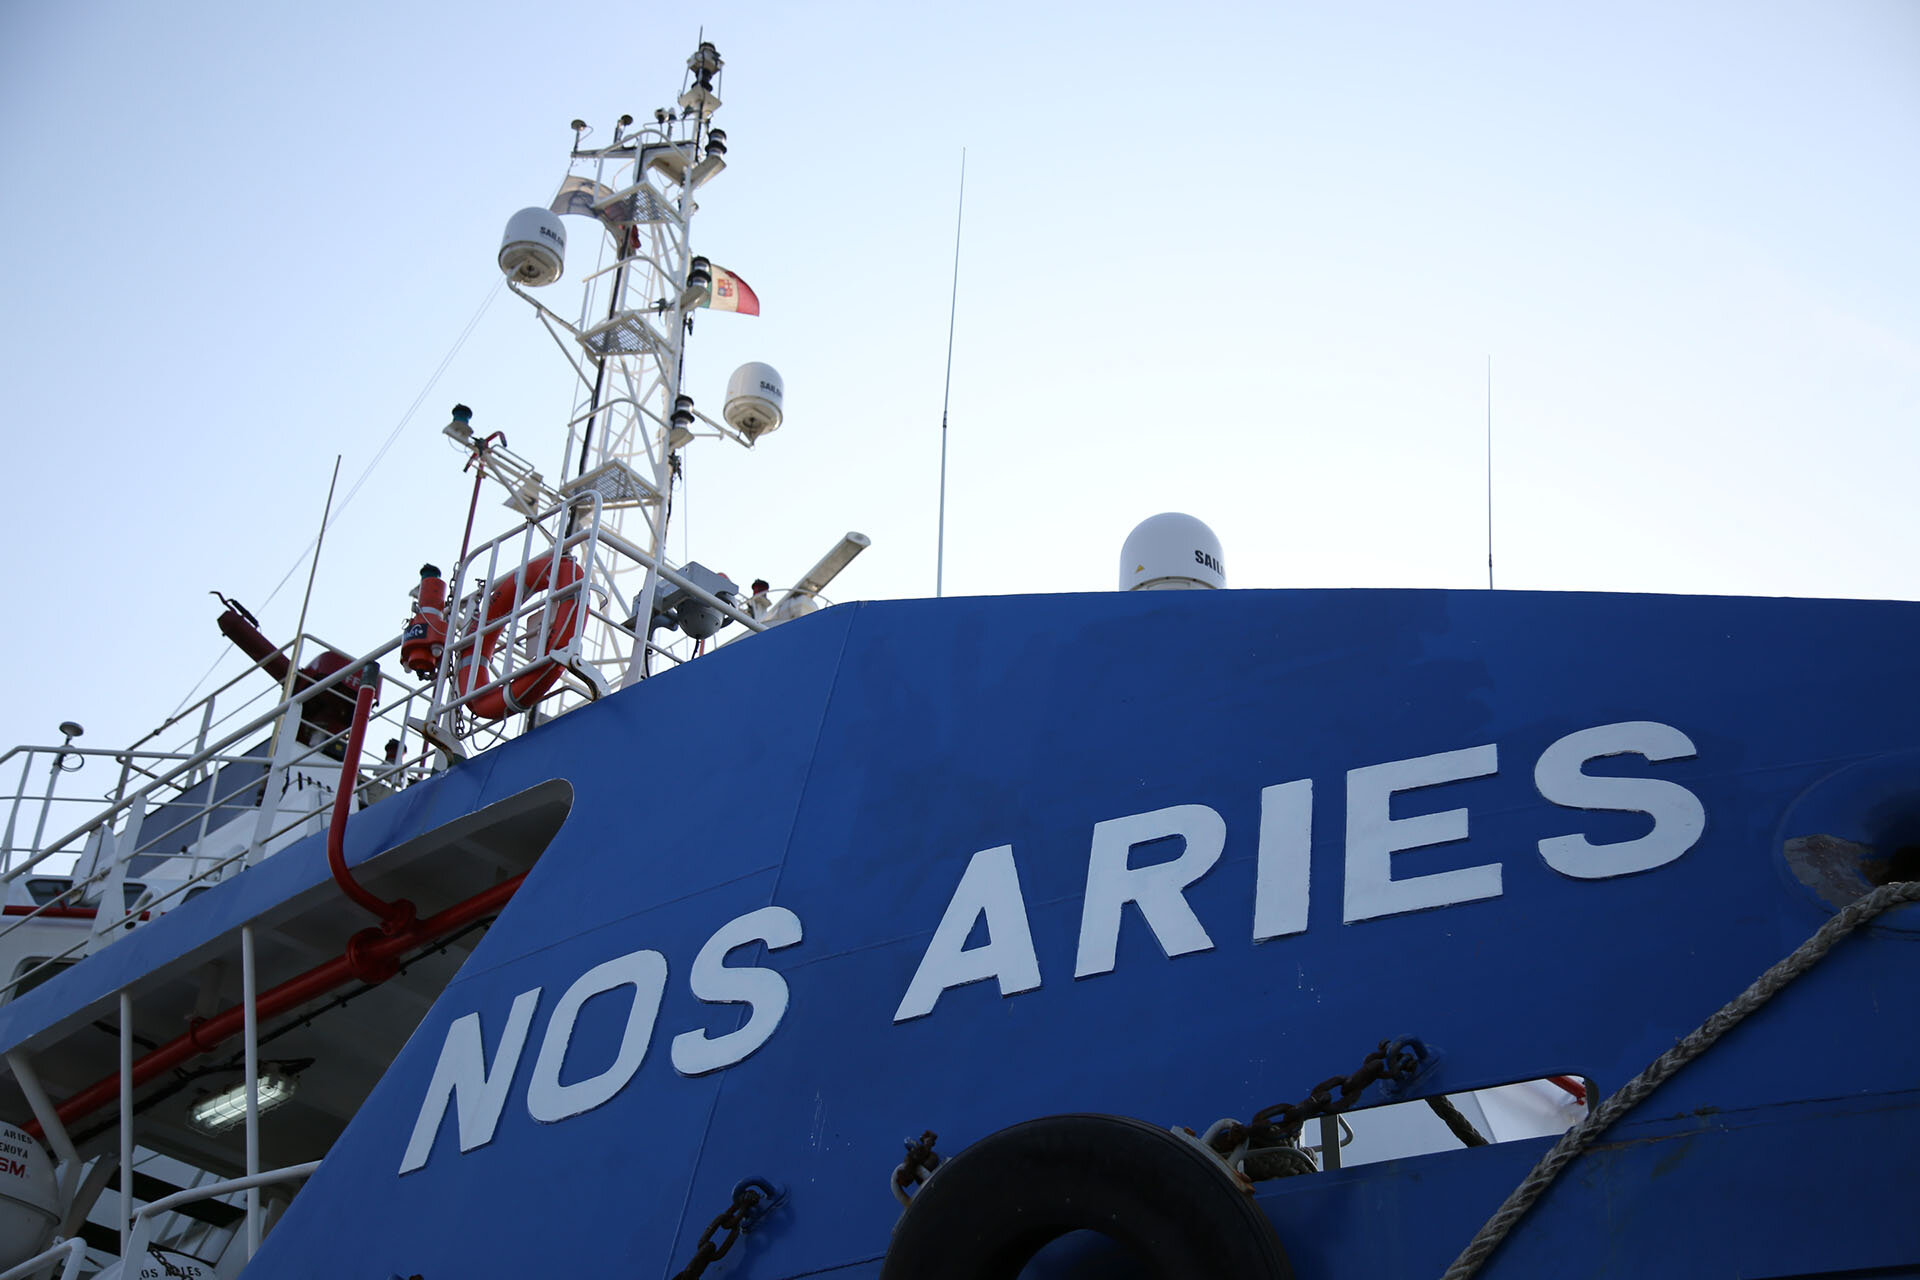 Nos Aries ship heading for the Pacific Ocean